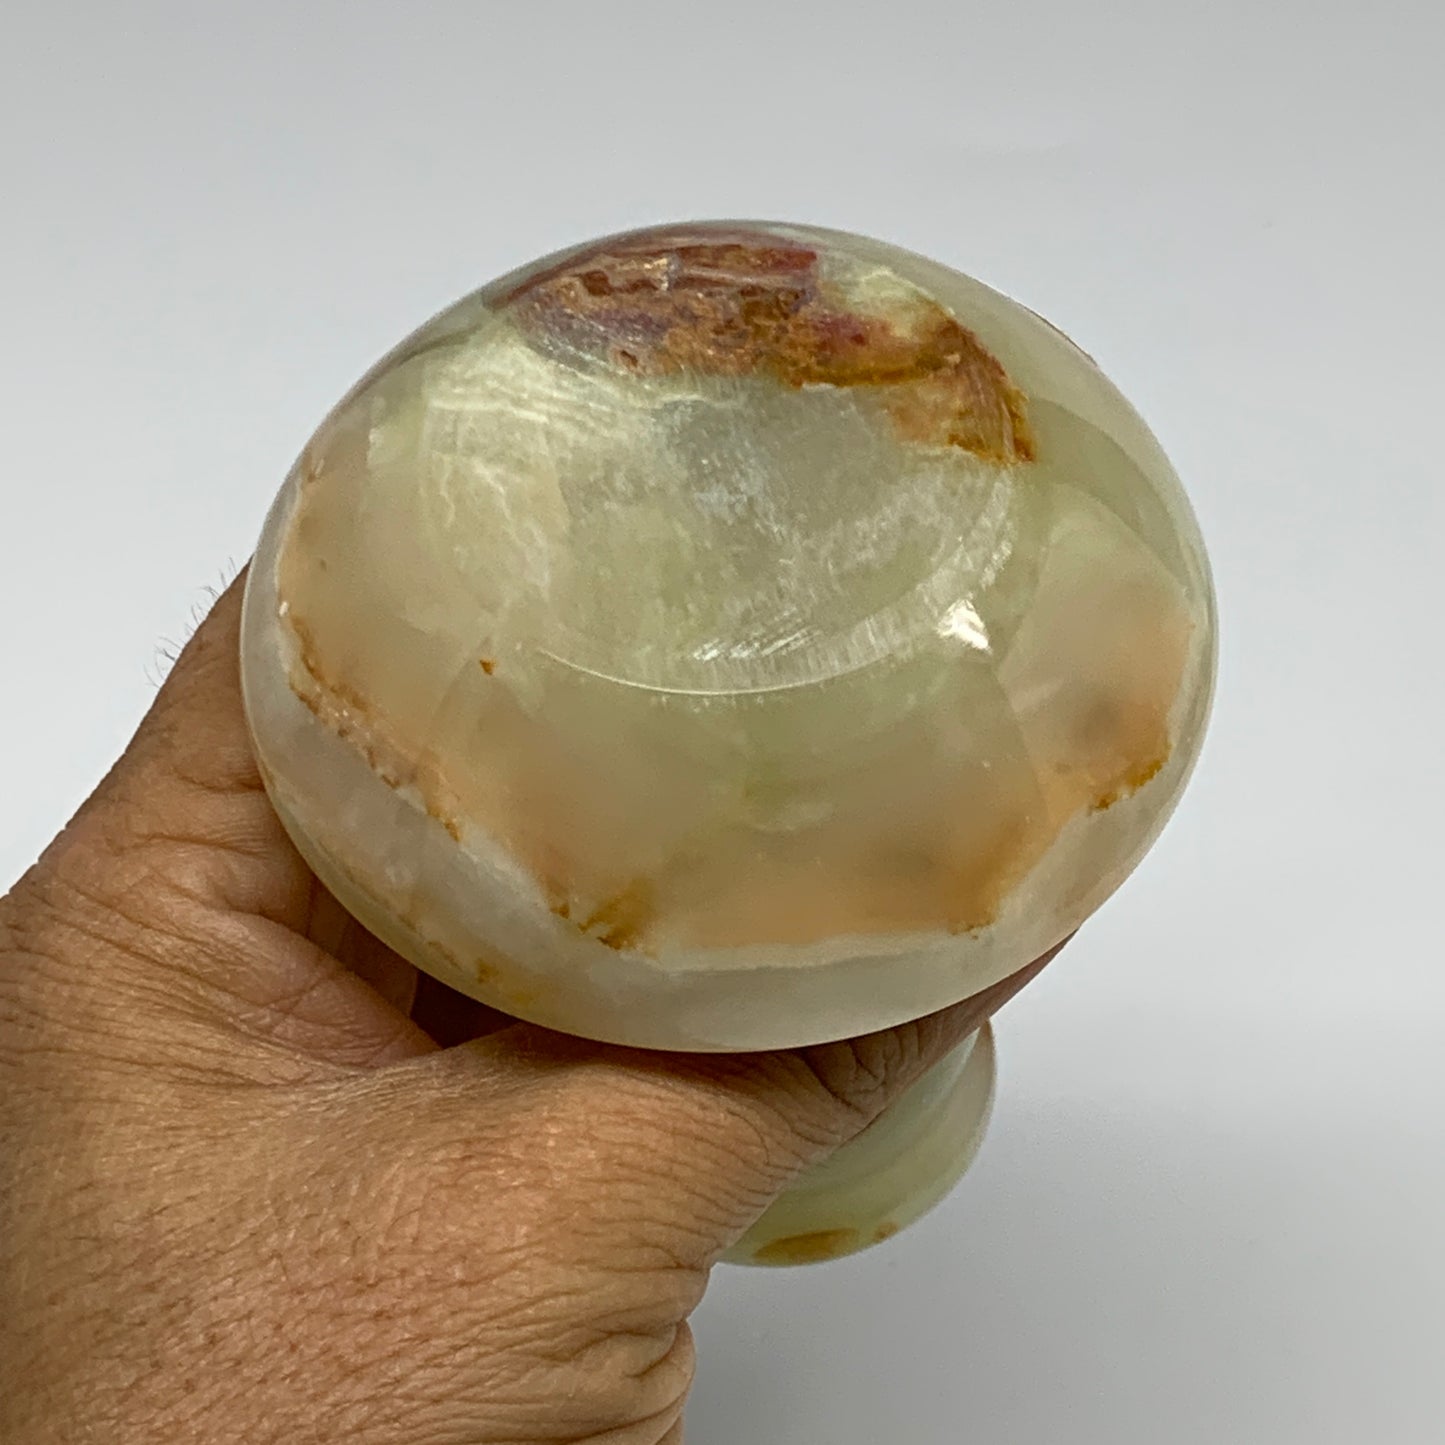 281g, 3.3"x1.5"x2.9", Natural Green Onyx Candle Holder Gemstone Carved, B32246